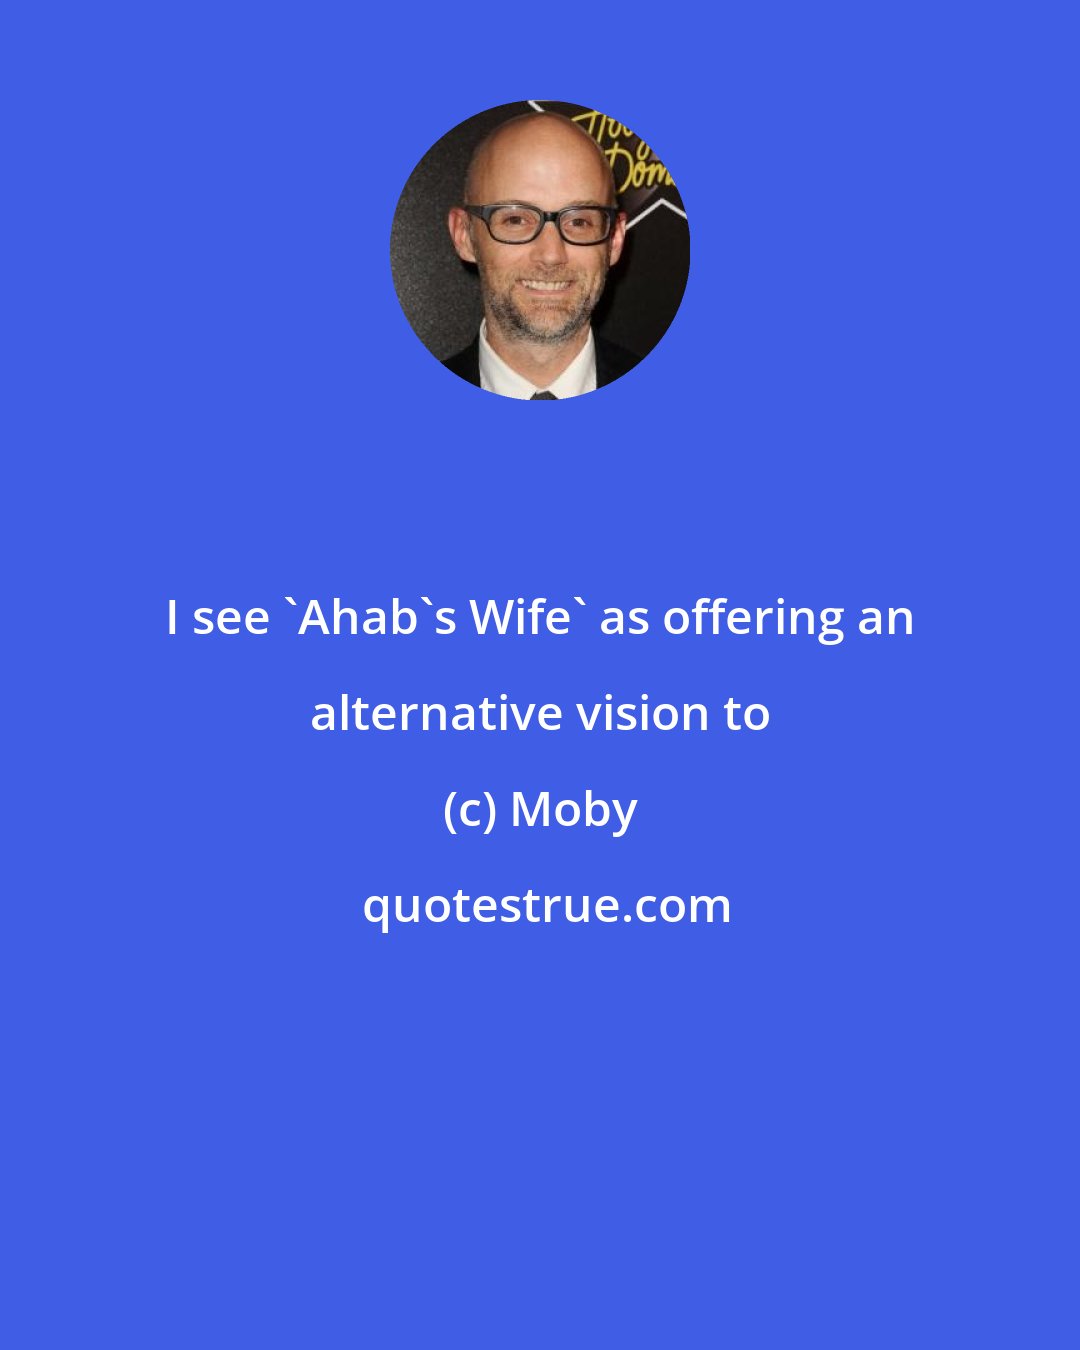 Moby: I see 'Ahab's Wife' as offering an alternative vision to